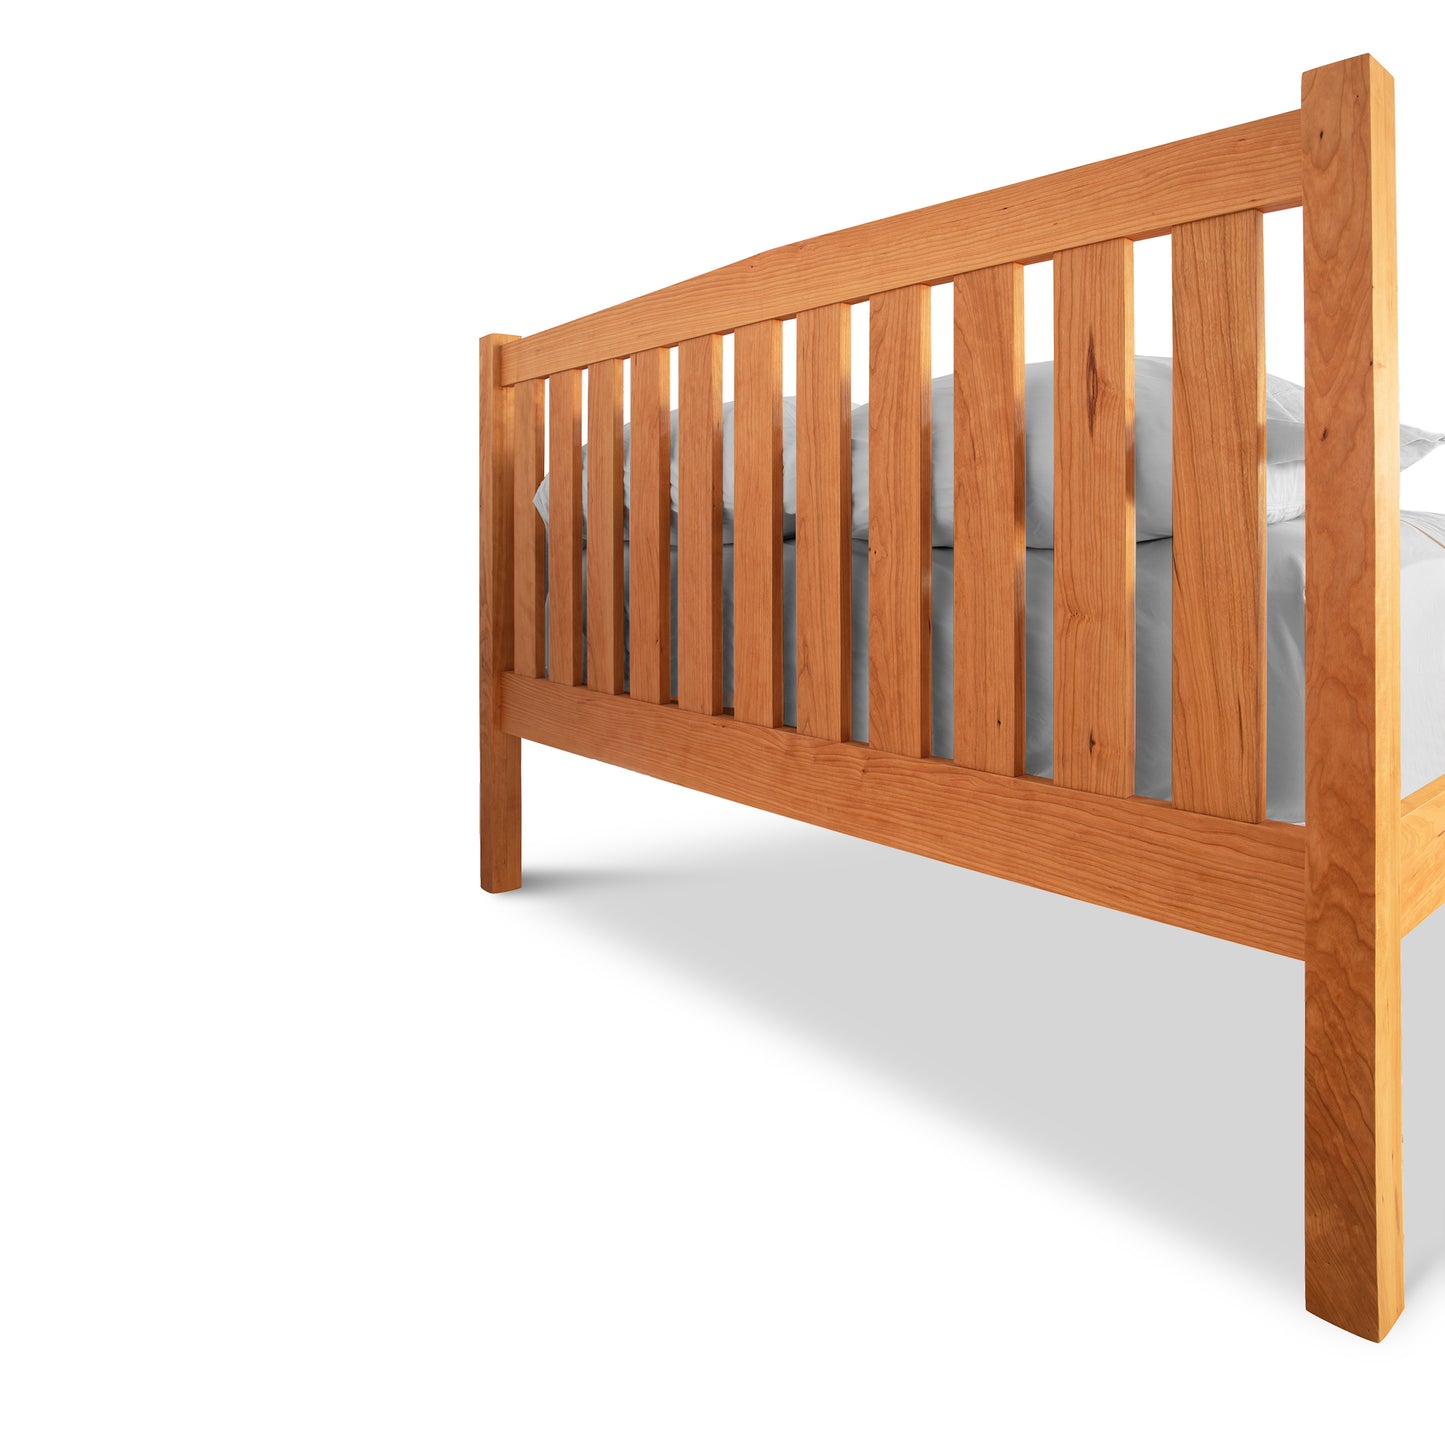 A Vermont Furniture Designs Bennington Bed with High Footboard - Queen - Floor Model with slats on a white background.